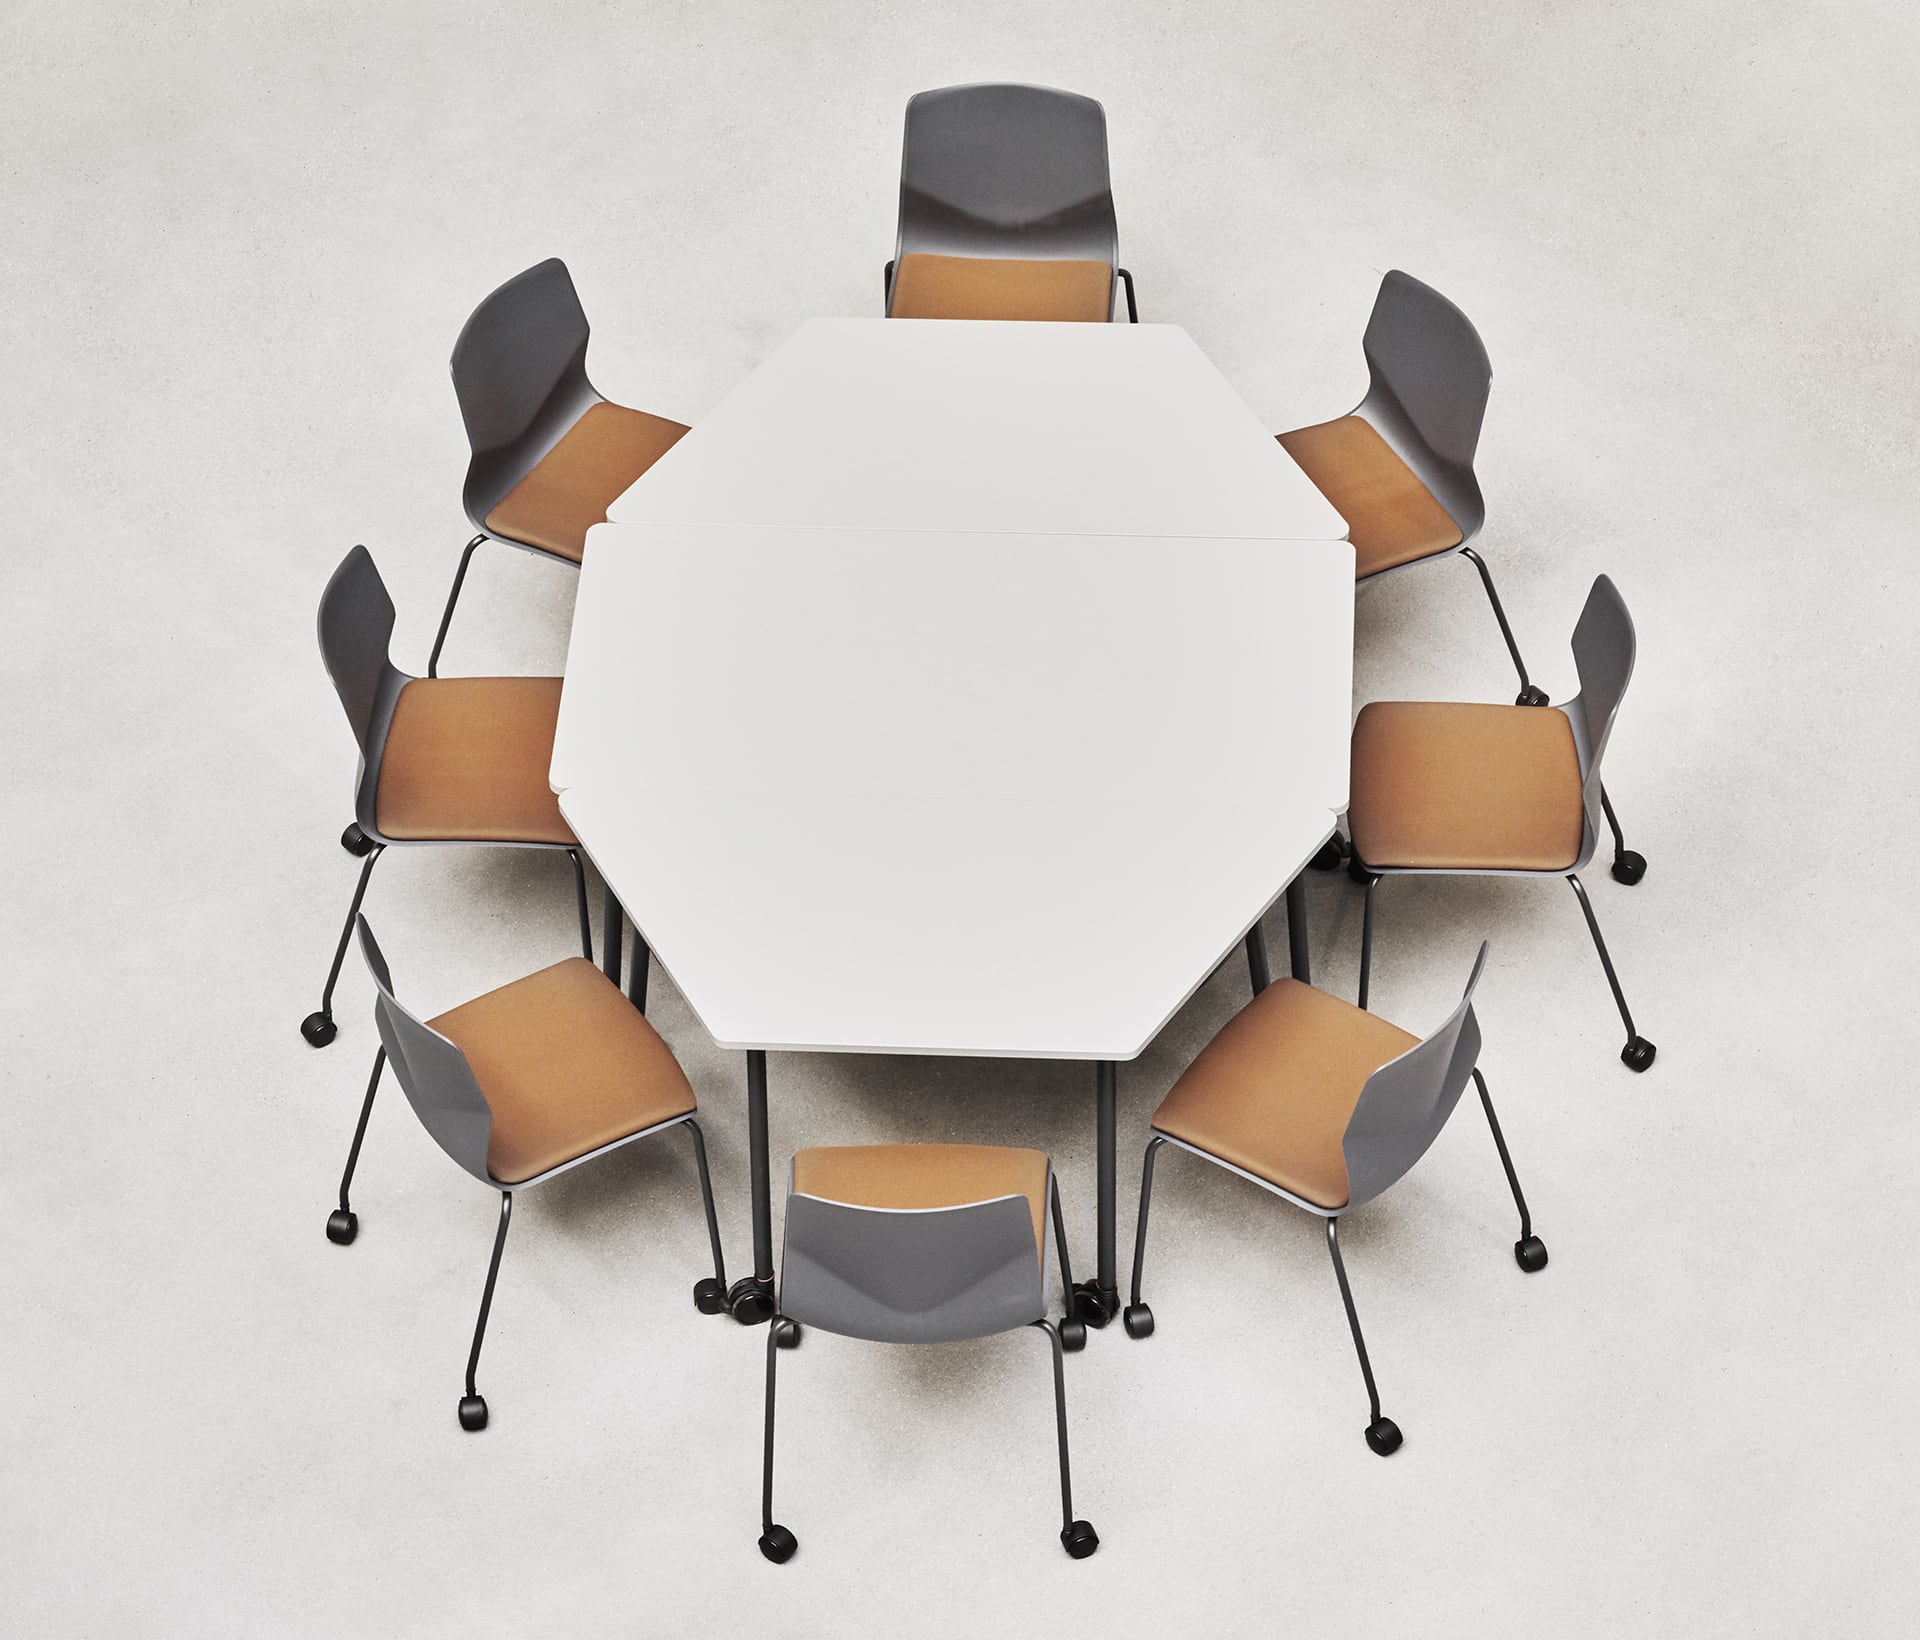 An octagonal table with six office desk chairs around it.